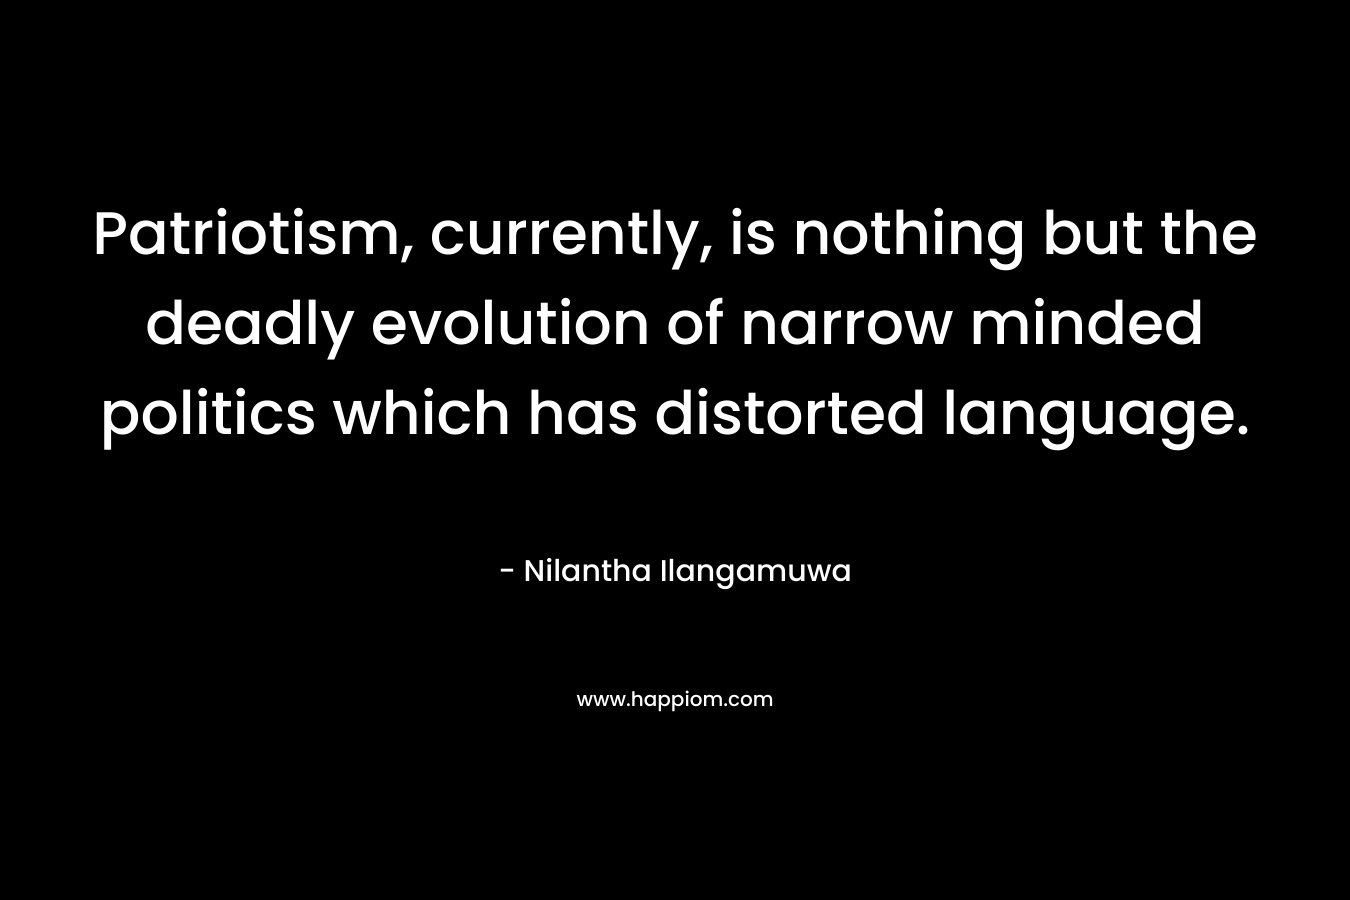 Patriotism, currently, is nothing but the deadly evolution of narrow minded politics which has distorted language. – Nilantha Ilangamuwa